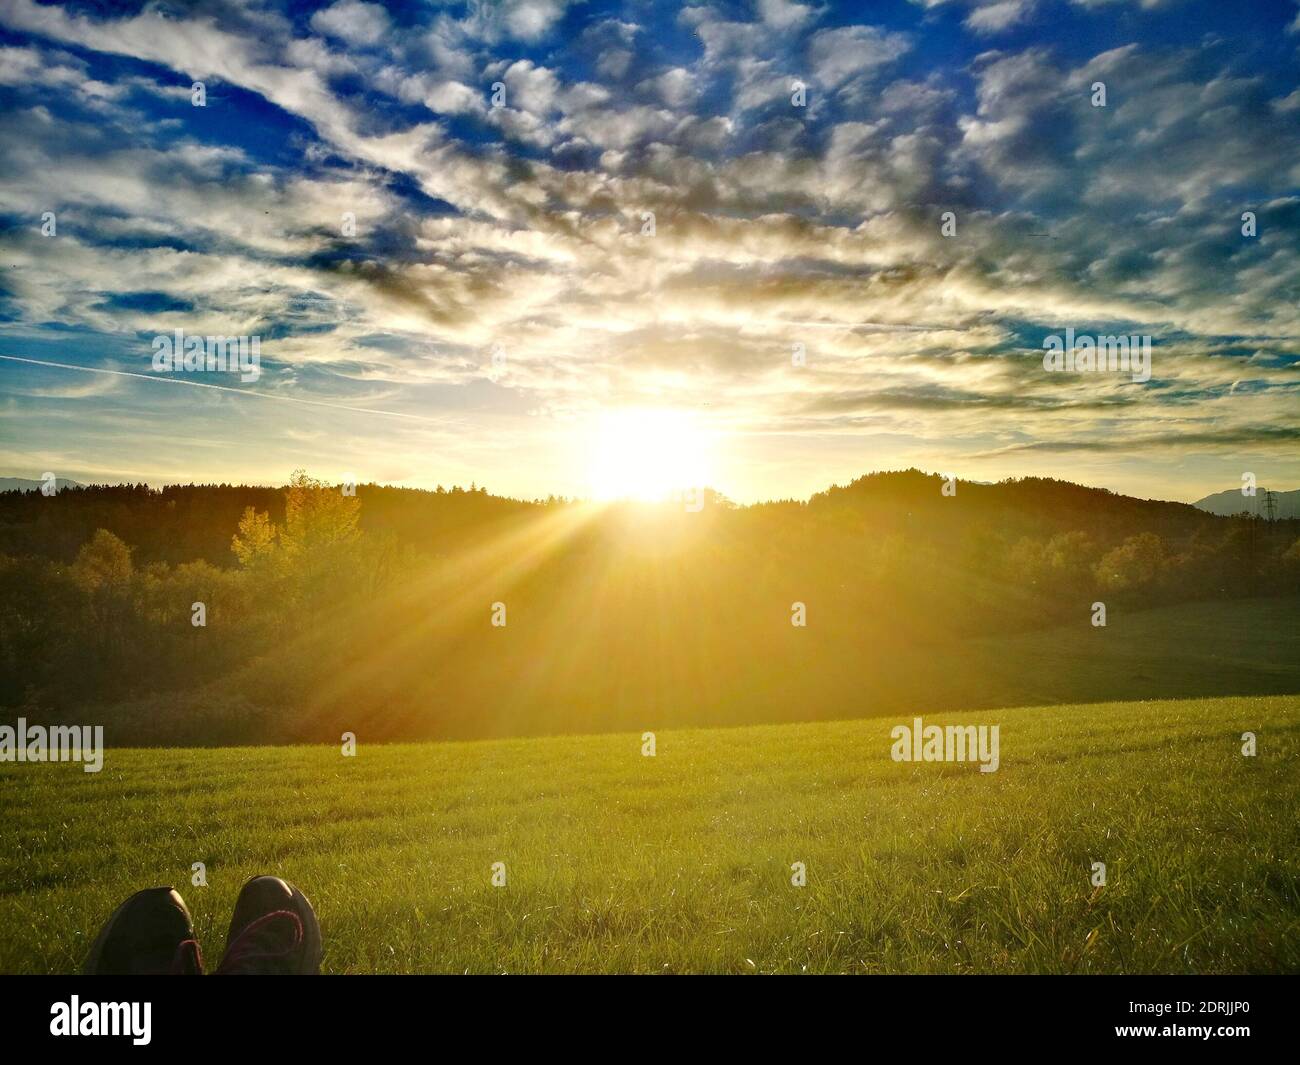 Low Section Of Person On Field Against Sky During Sunset Stock Photo